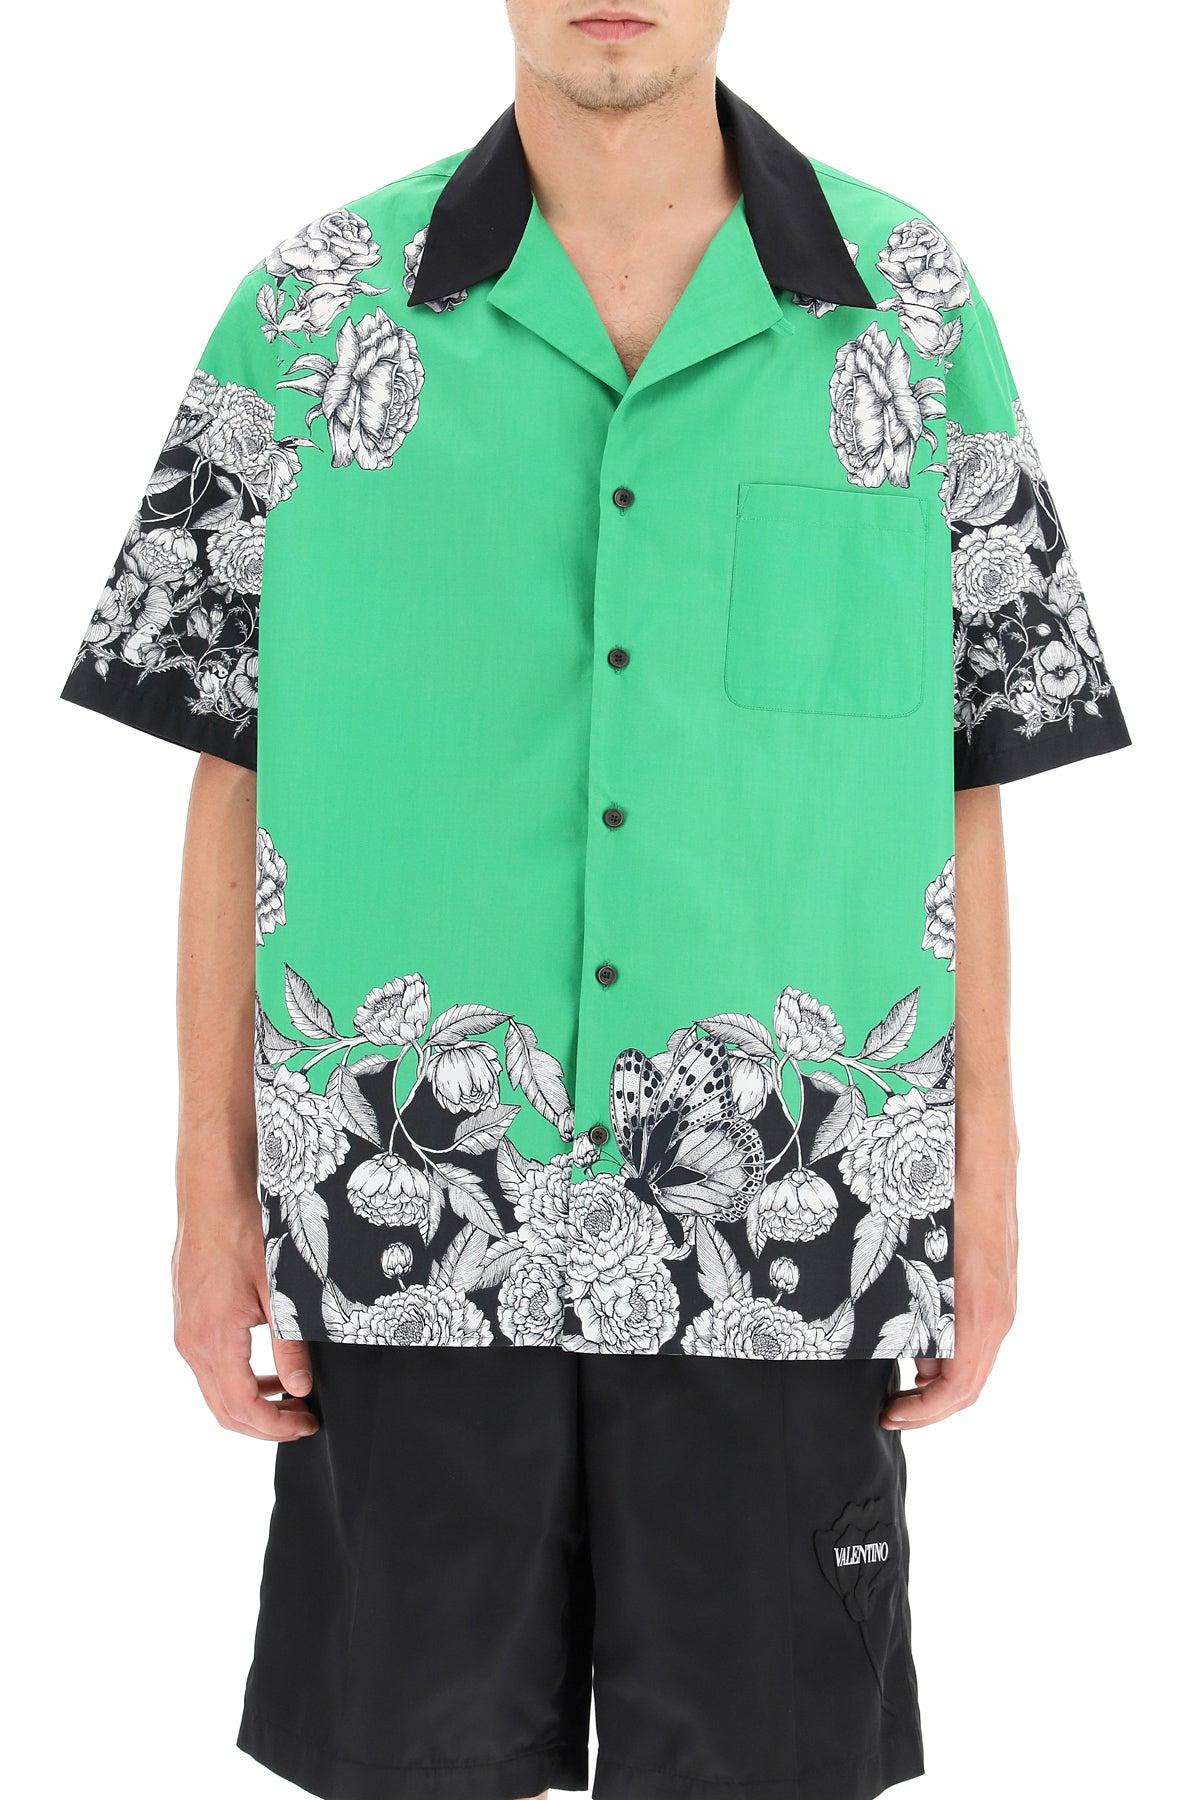 Valentino Cotton Dark Blooming Print Short-sleeved Shirt in Green for Men -  Save 24% | Lyst